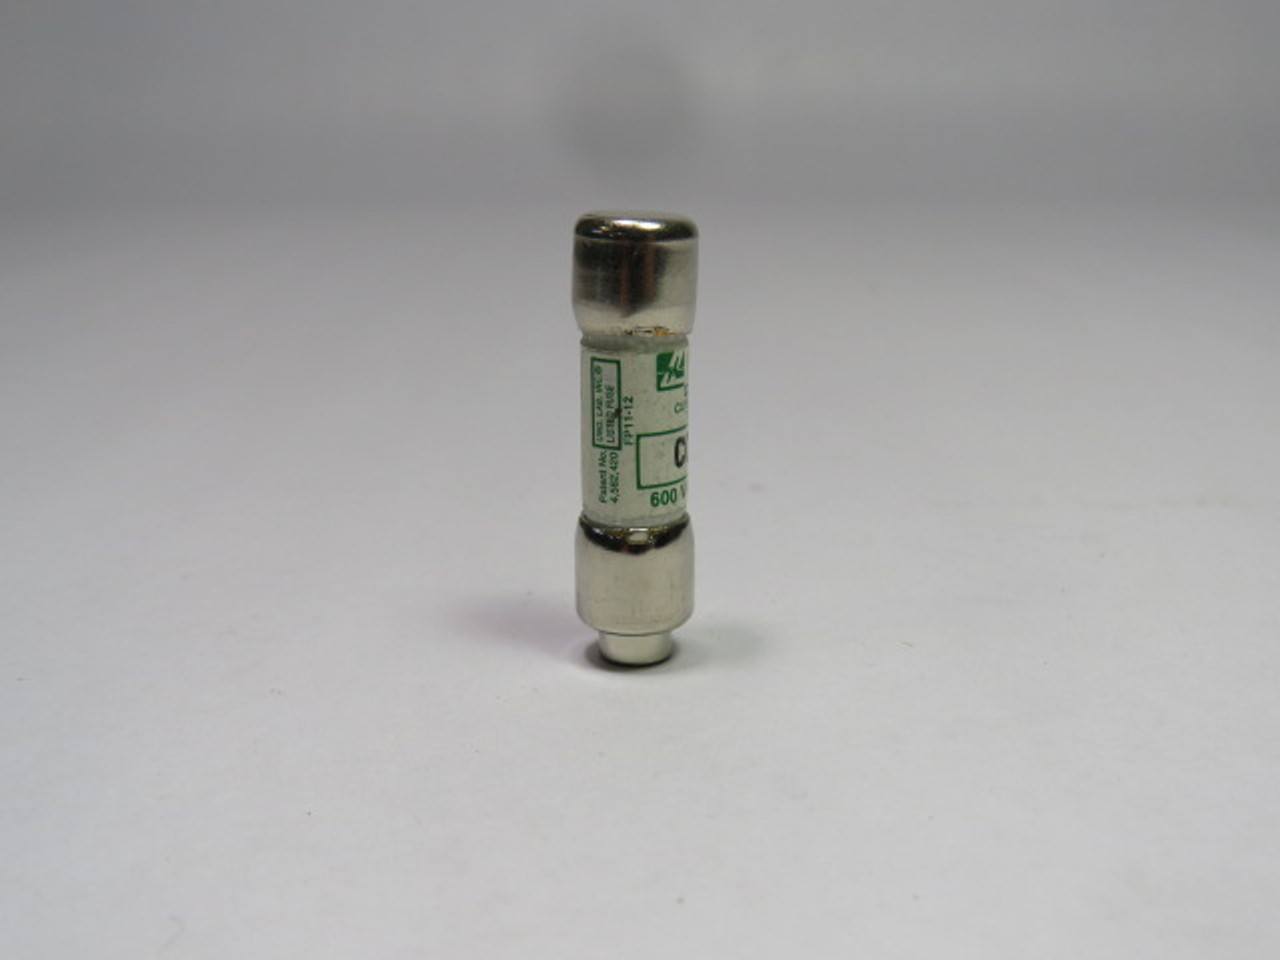 Littelfuse CCMR-3 Time Delay Fuse 3A 600V USED